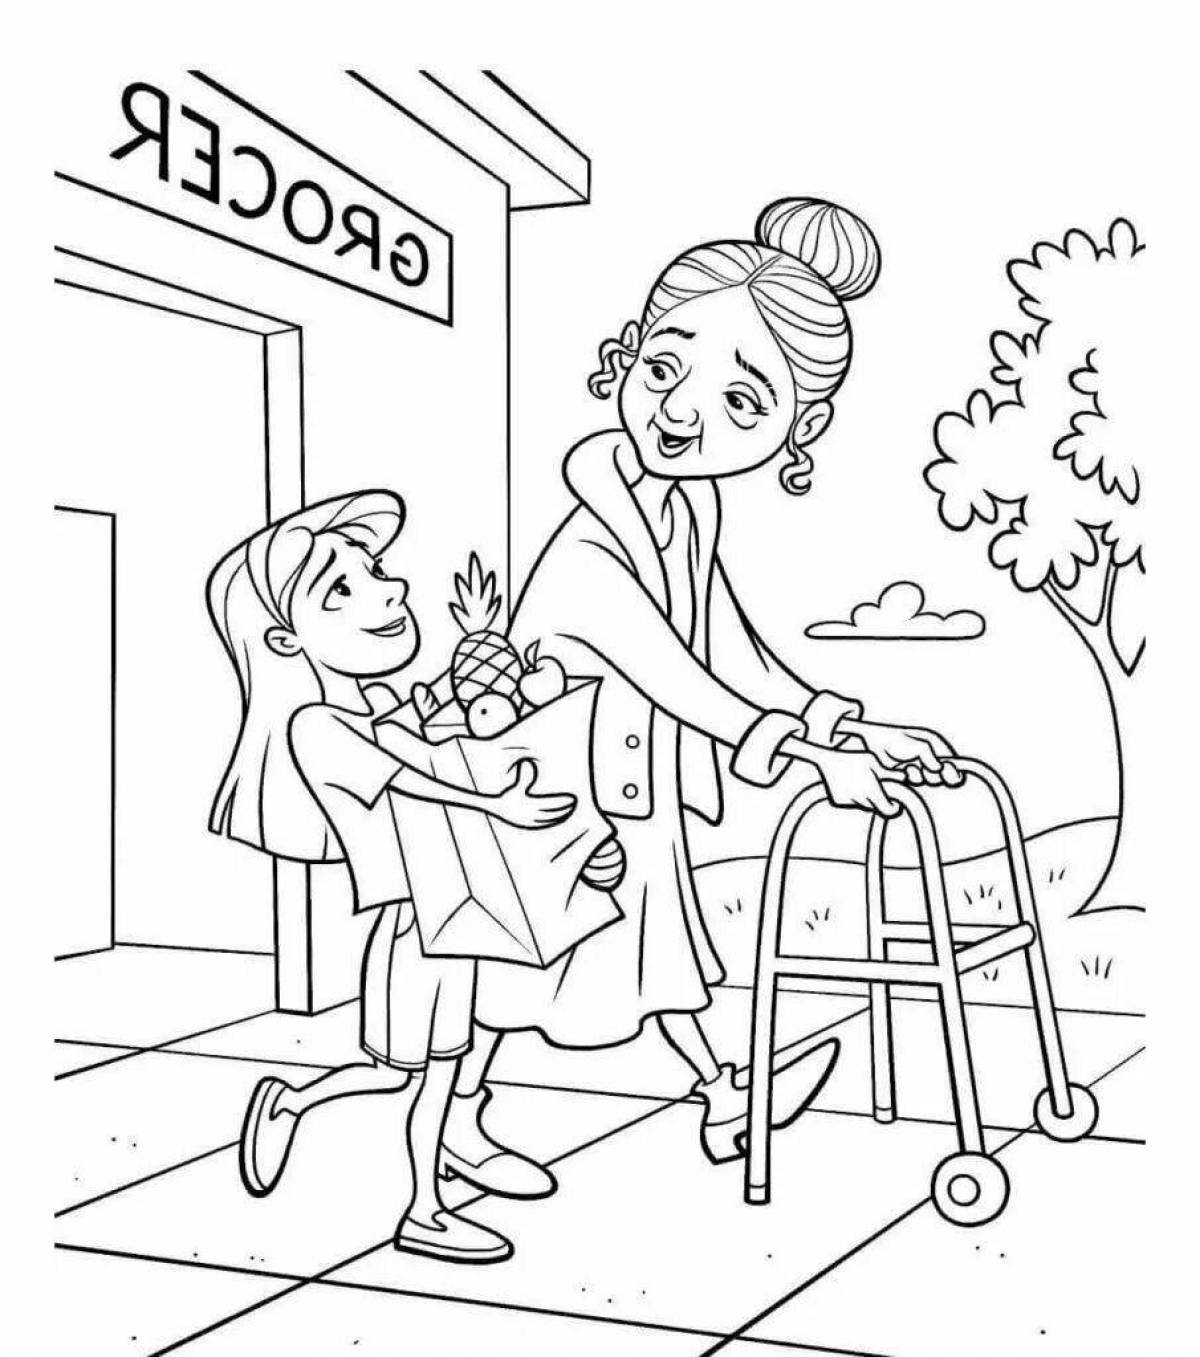 Educational coloring book to help parents